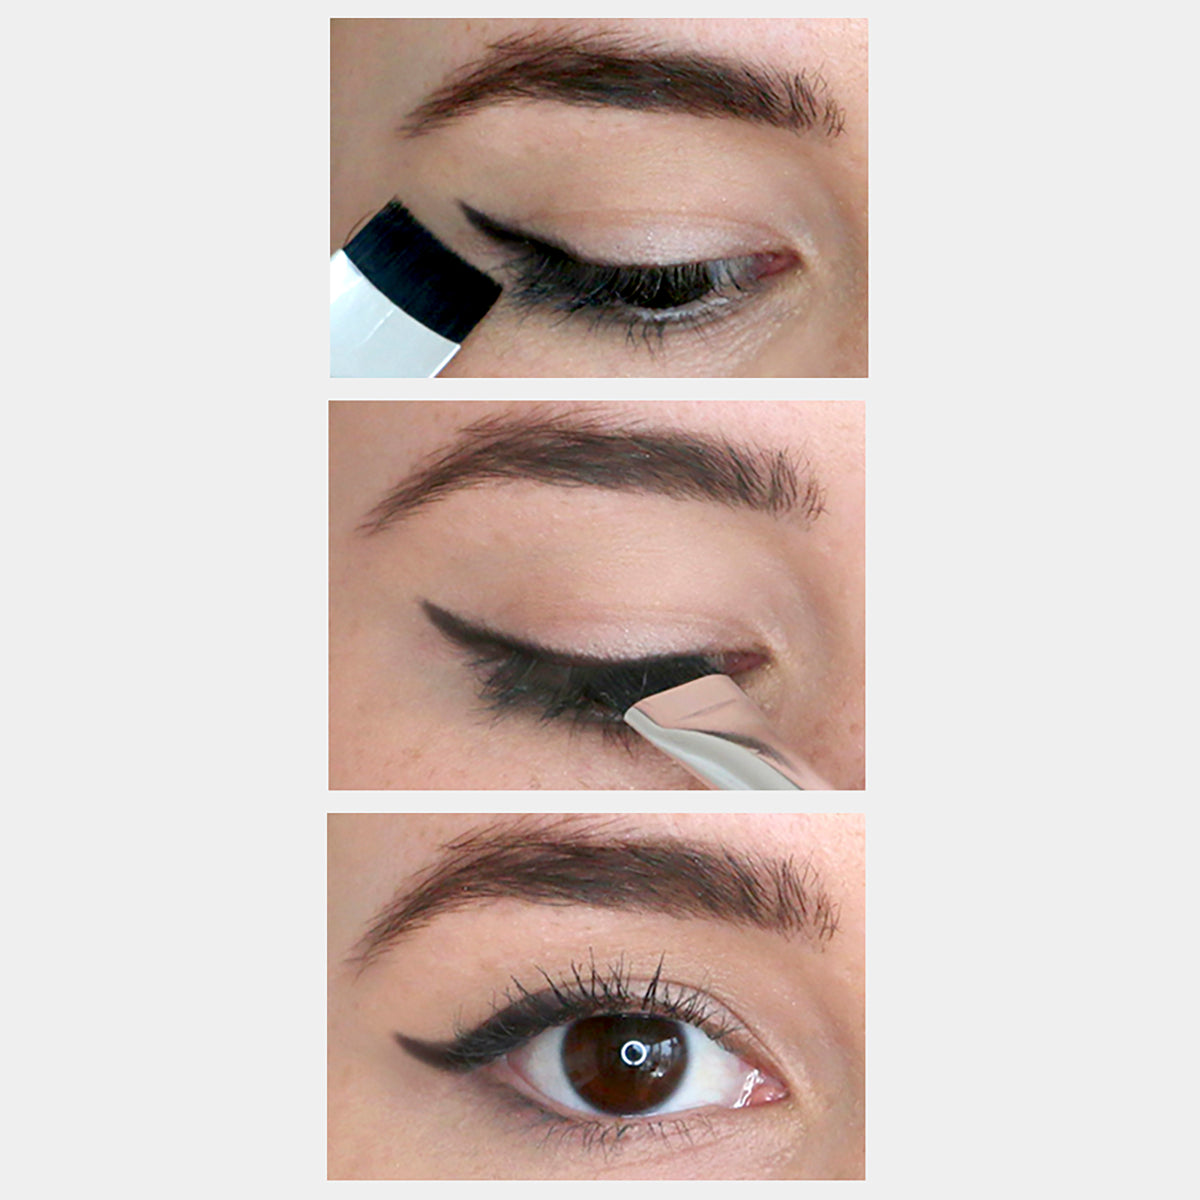 Demonstration of using the arc brush on upper lash line to create a simple cat eye look